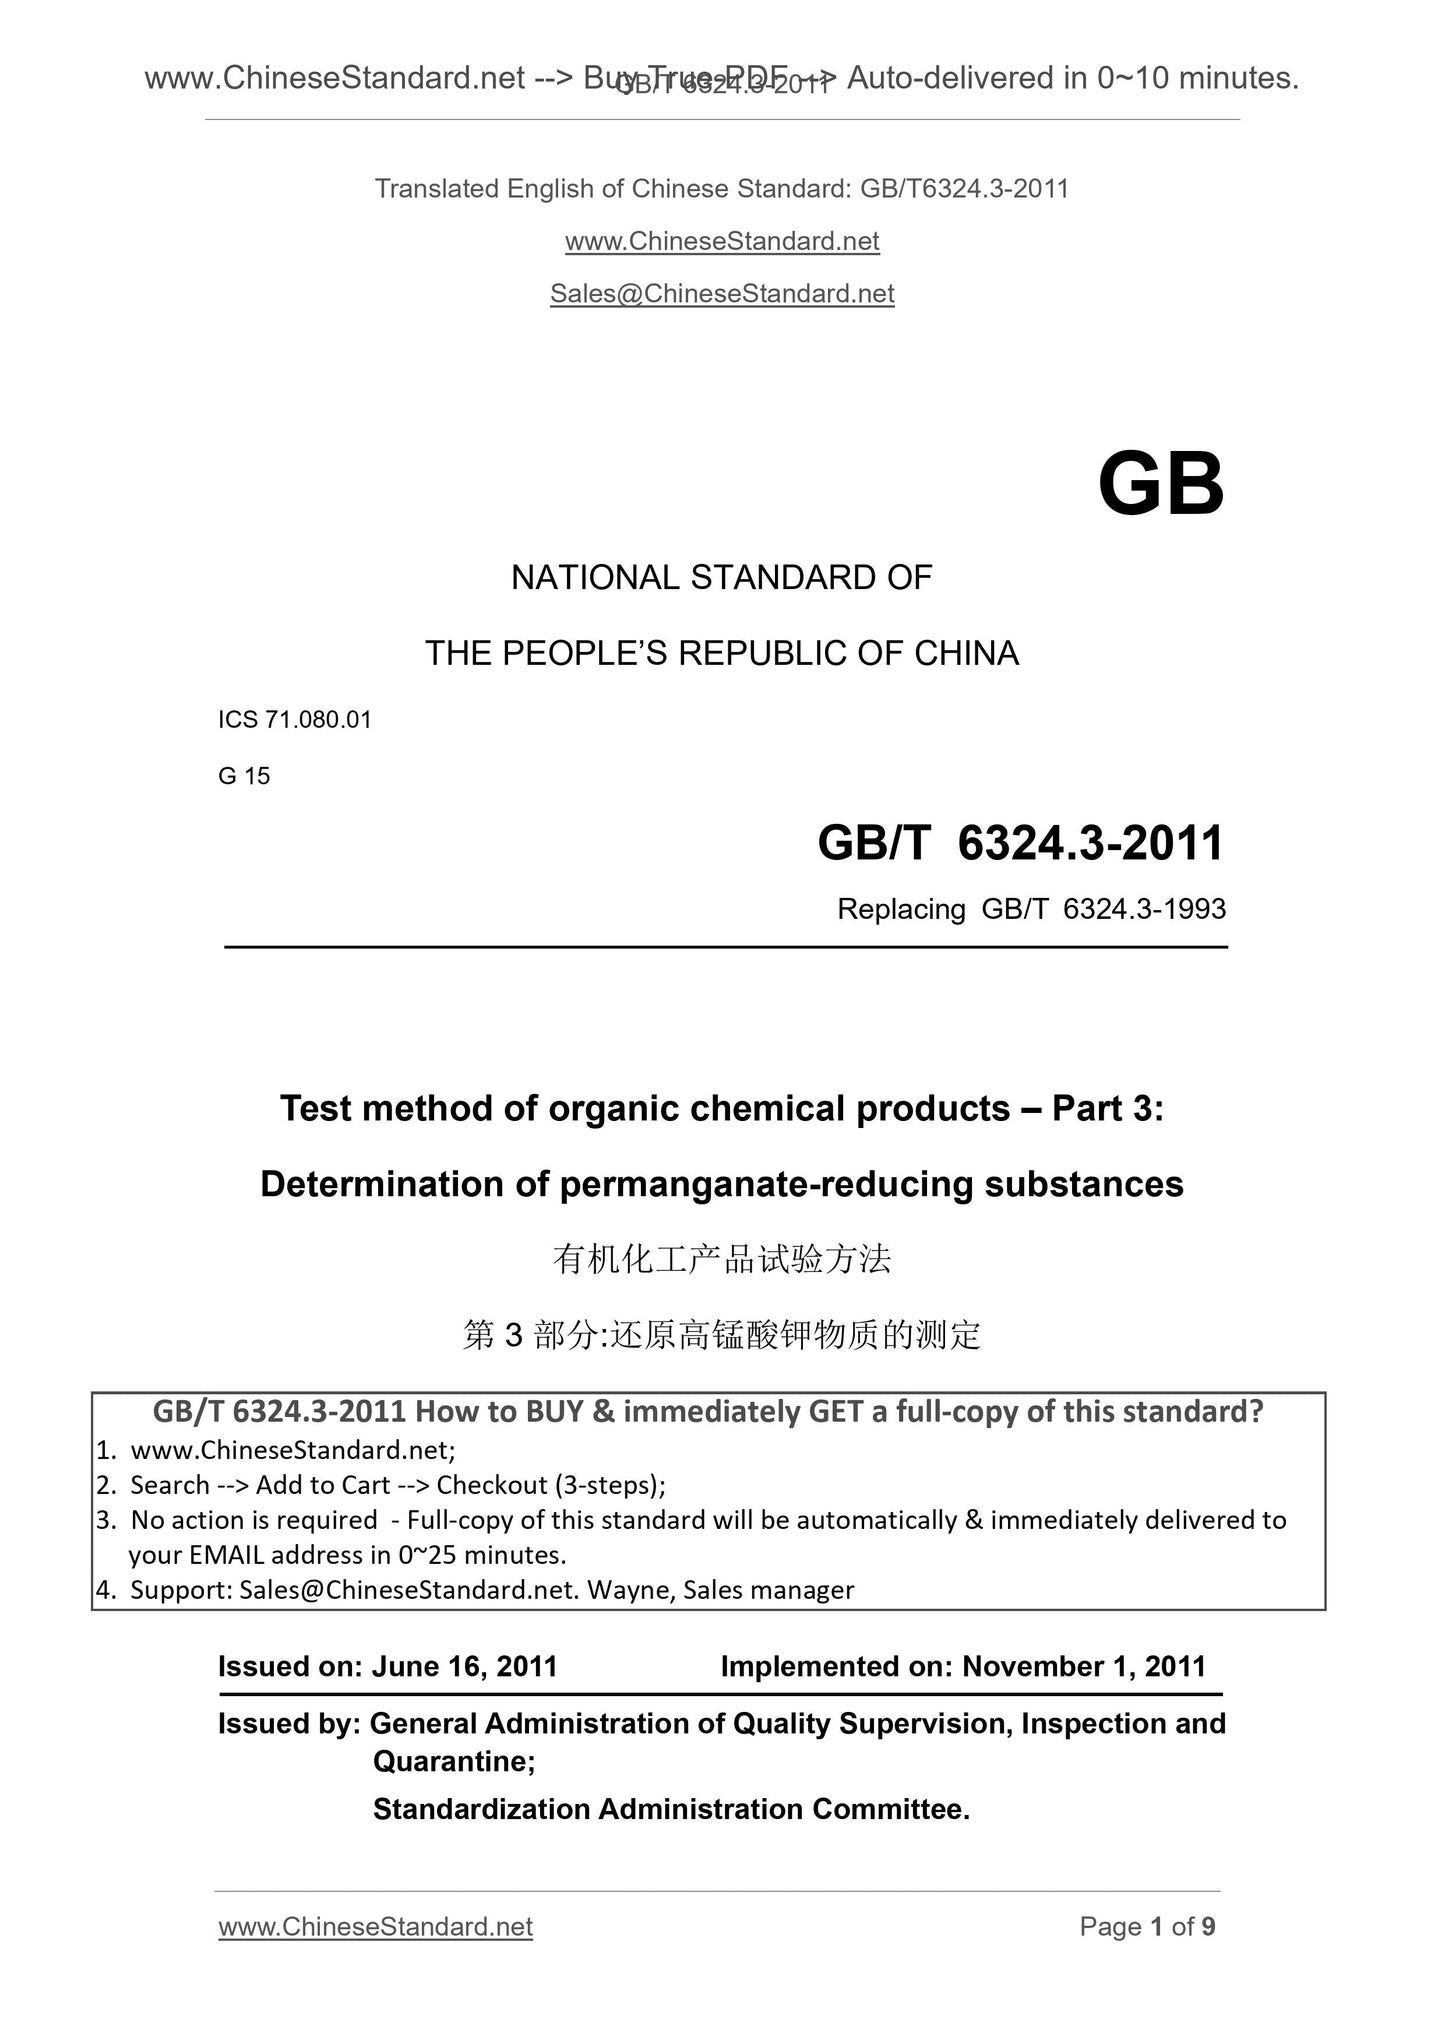 GB/T 6324.3-2011 Page 1